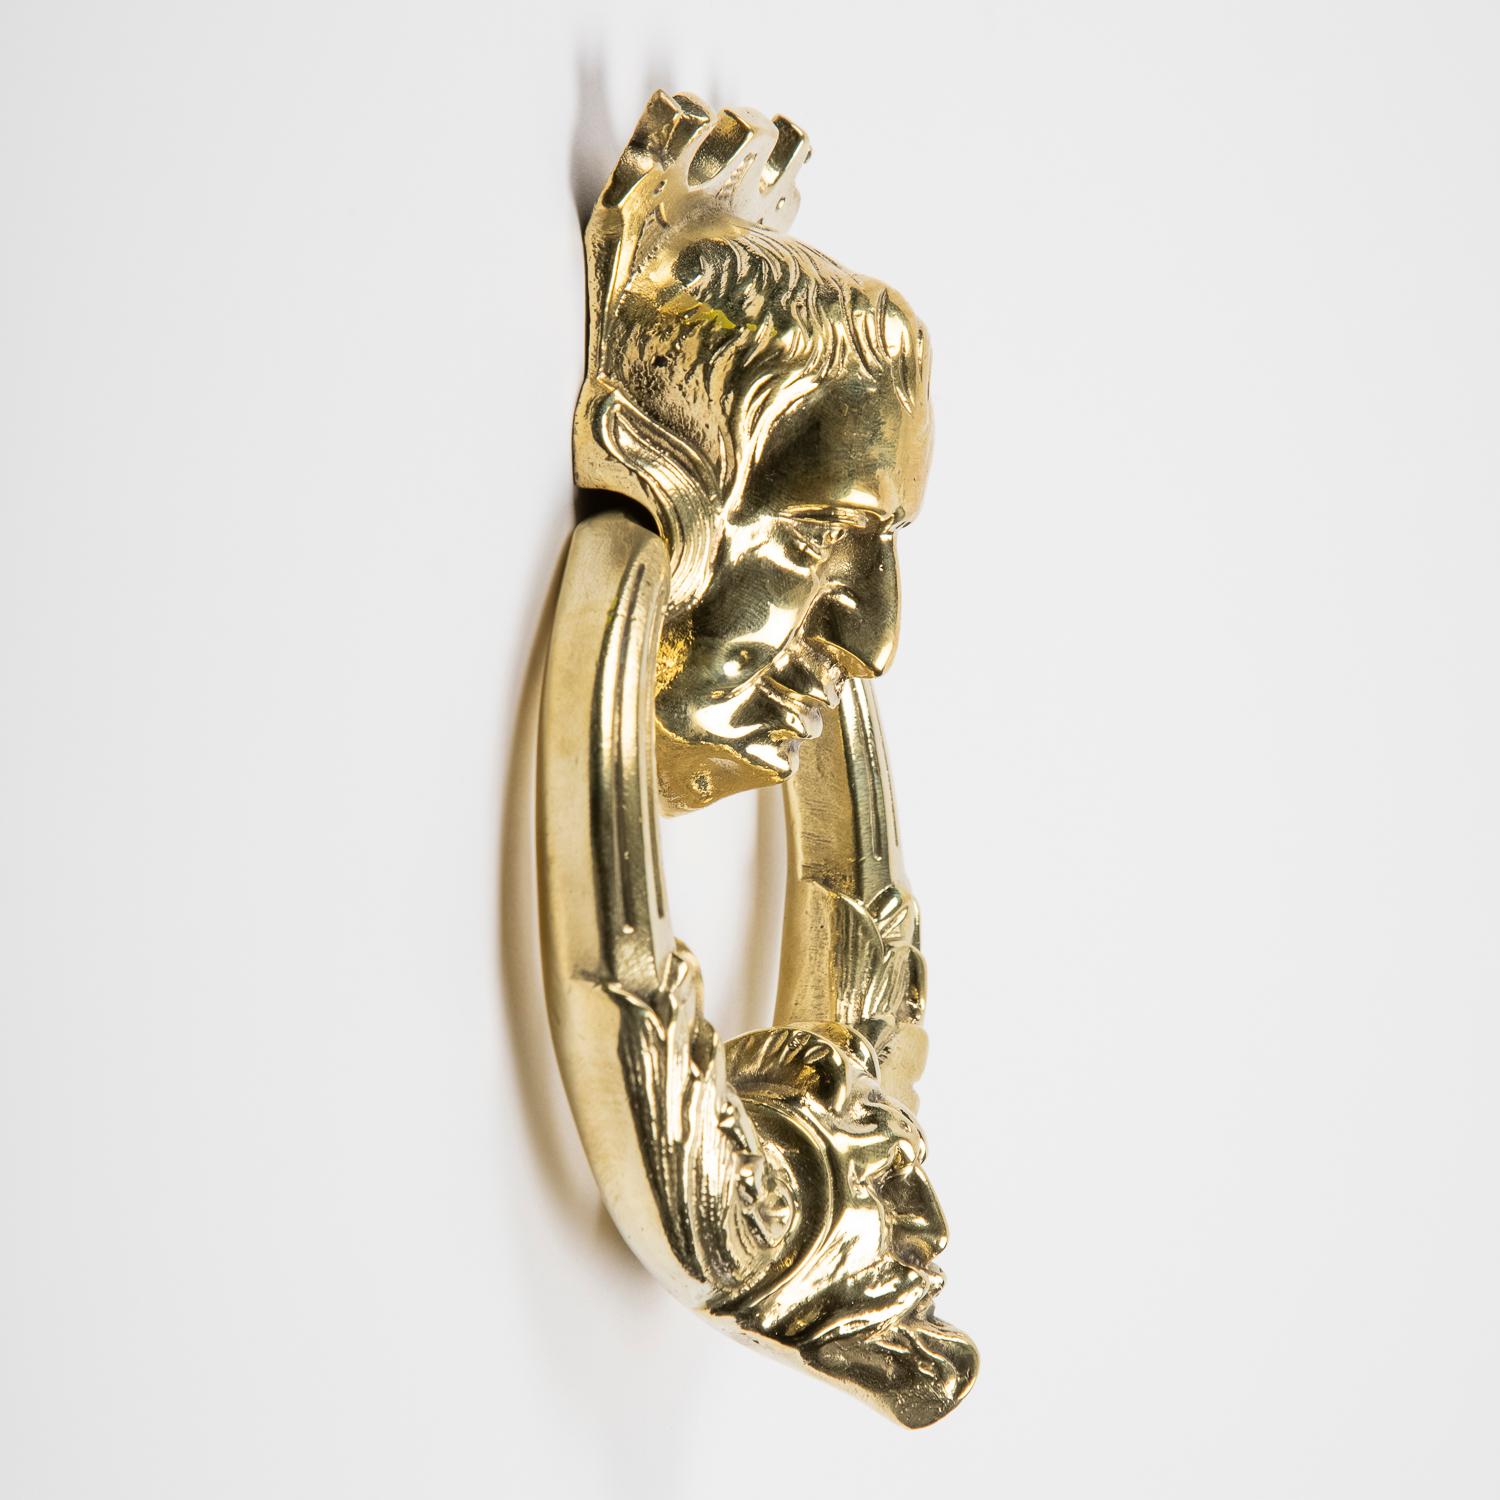 A polished bronze door knocker, with two men's faces.

Projection: 4 cm.